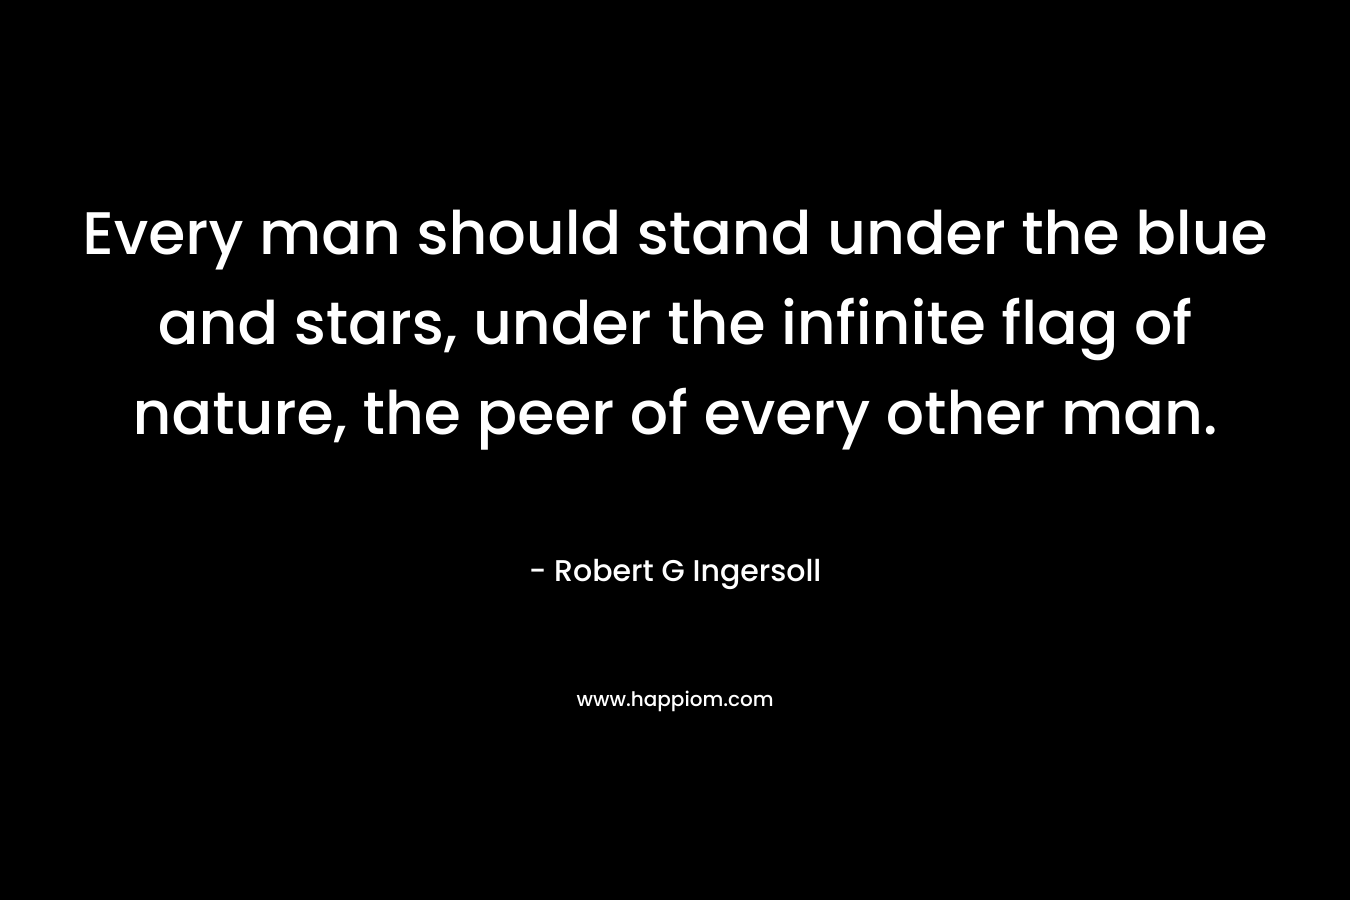 Every man should stand under the blue and stars, under the infinite flag of nature, the peer of every other man.